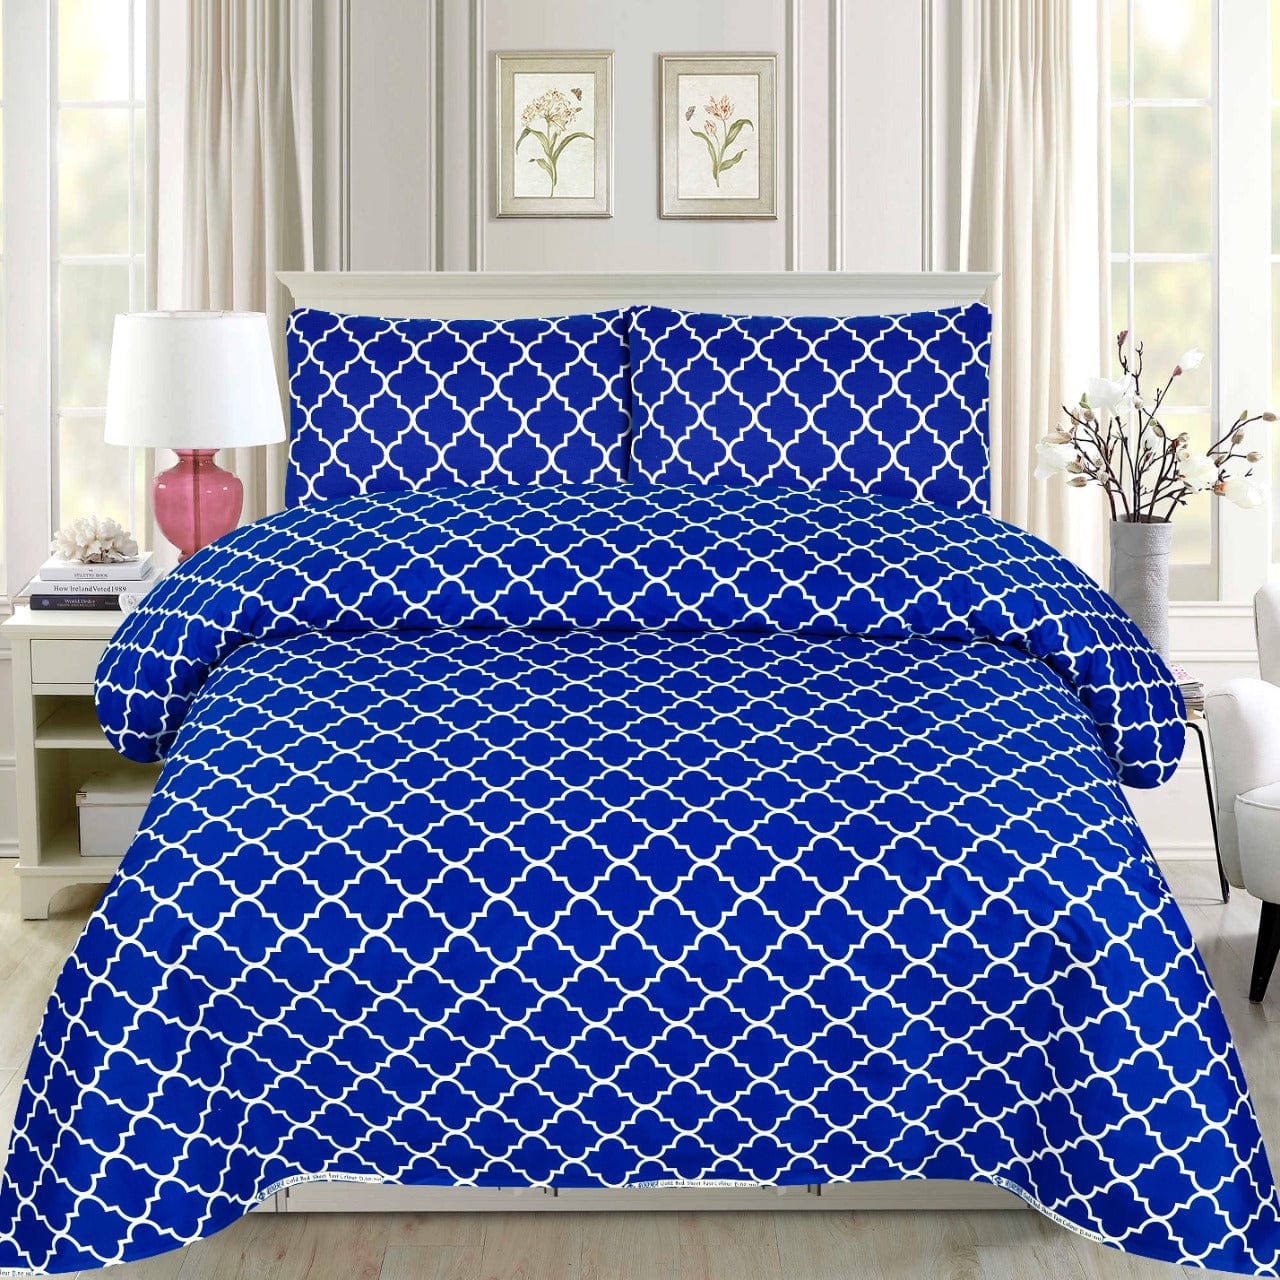 Grace D762- 6 pc summer Comforter Set with 4 pillow covers